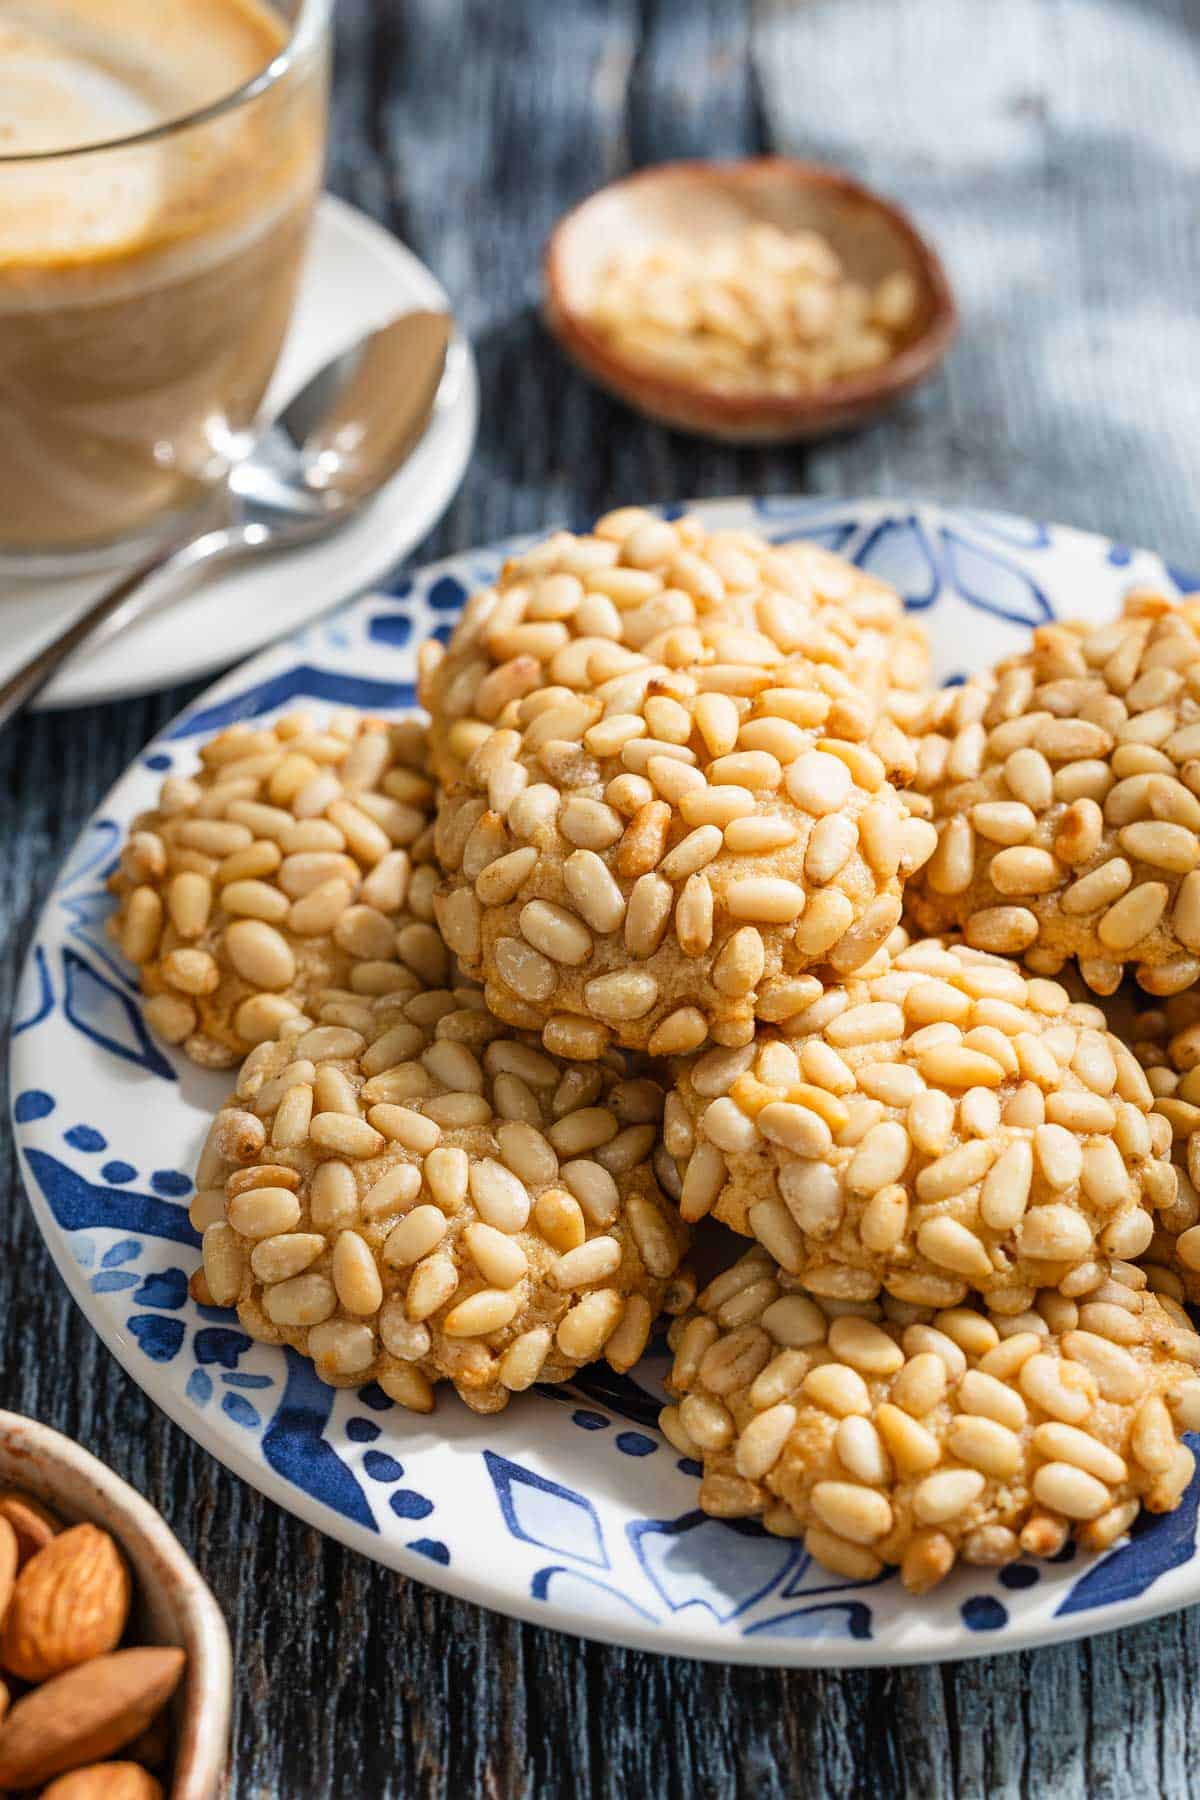 several pignoli cookies stacked on a serving plate next to a small bowl of pine nuts, a cup of coffee with a spoon, and a bowl of almonds.